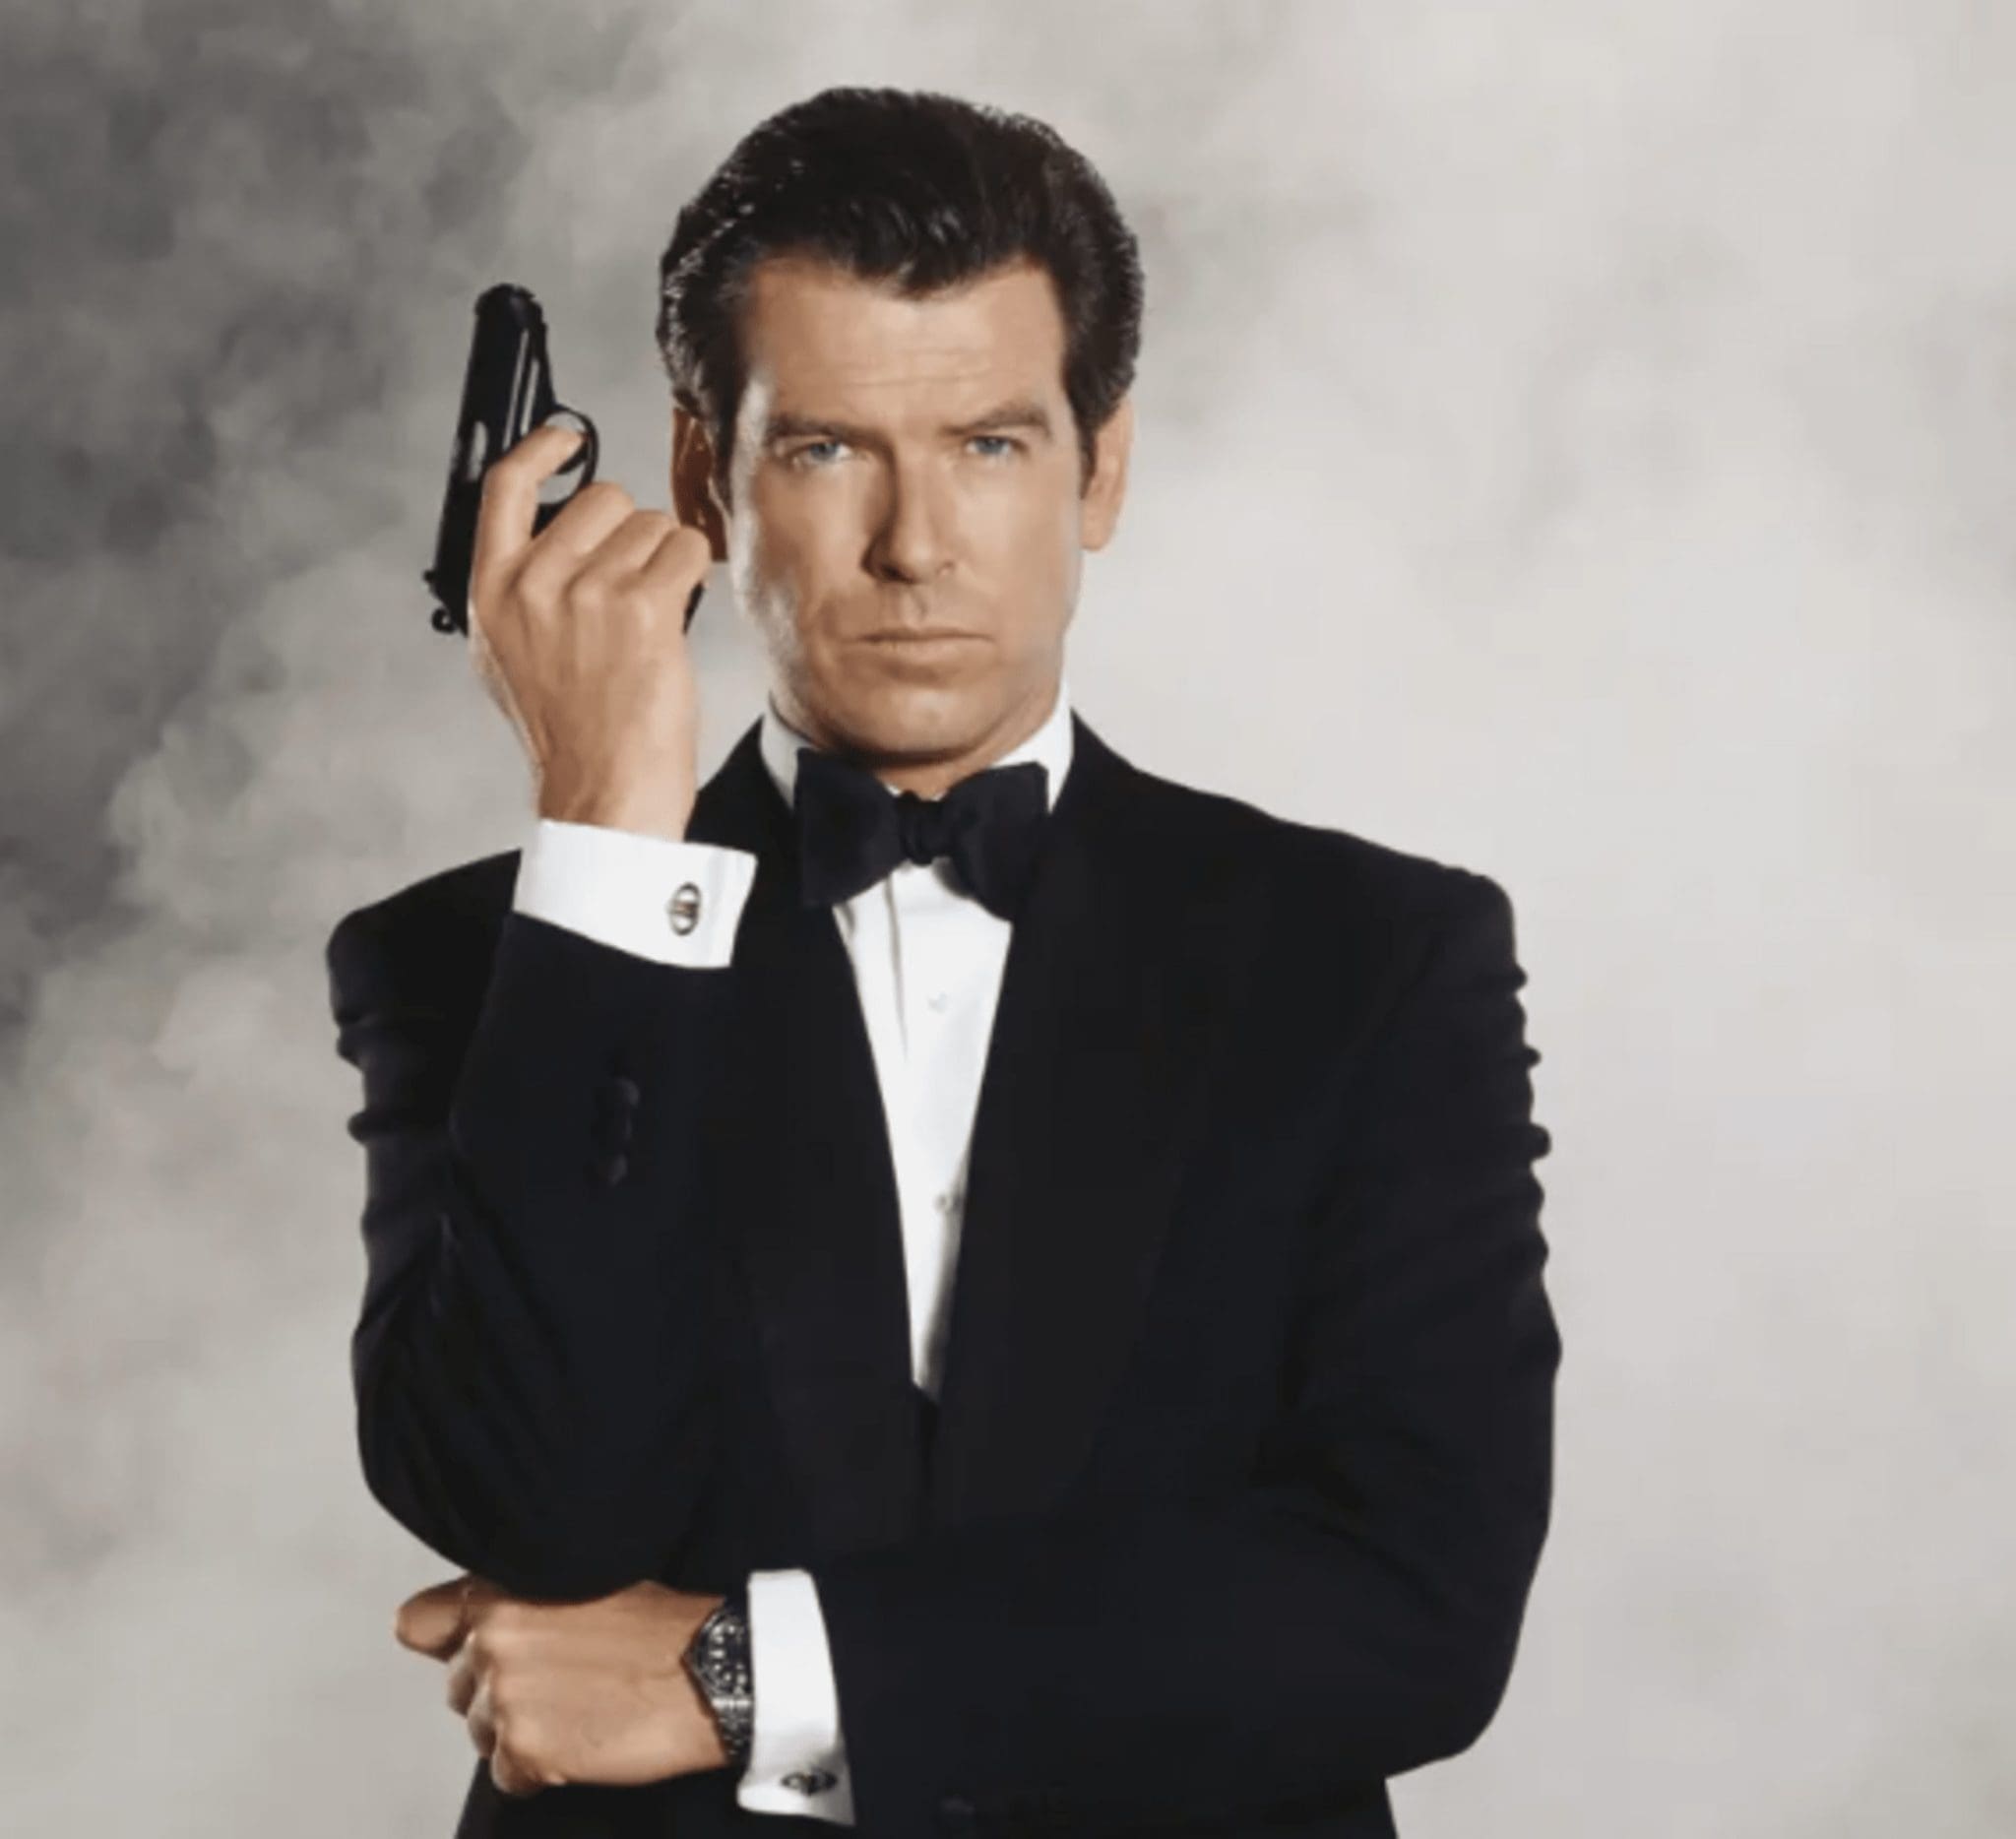 Pierce Brosnan Has Already Stated That He Is Apathetic Regarding The Identity Of The Actor Who Would Play James Bond